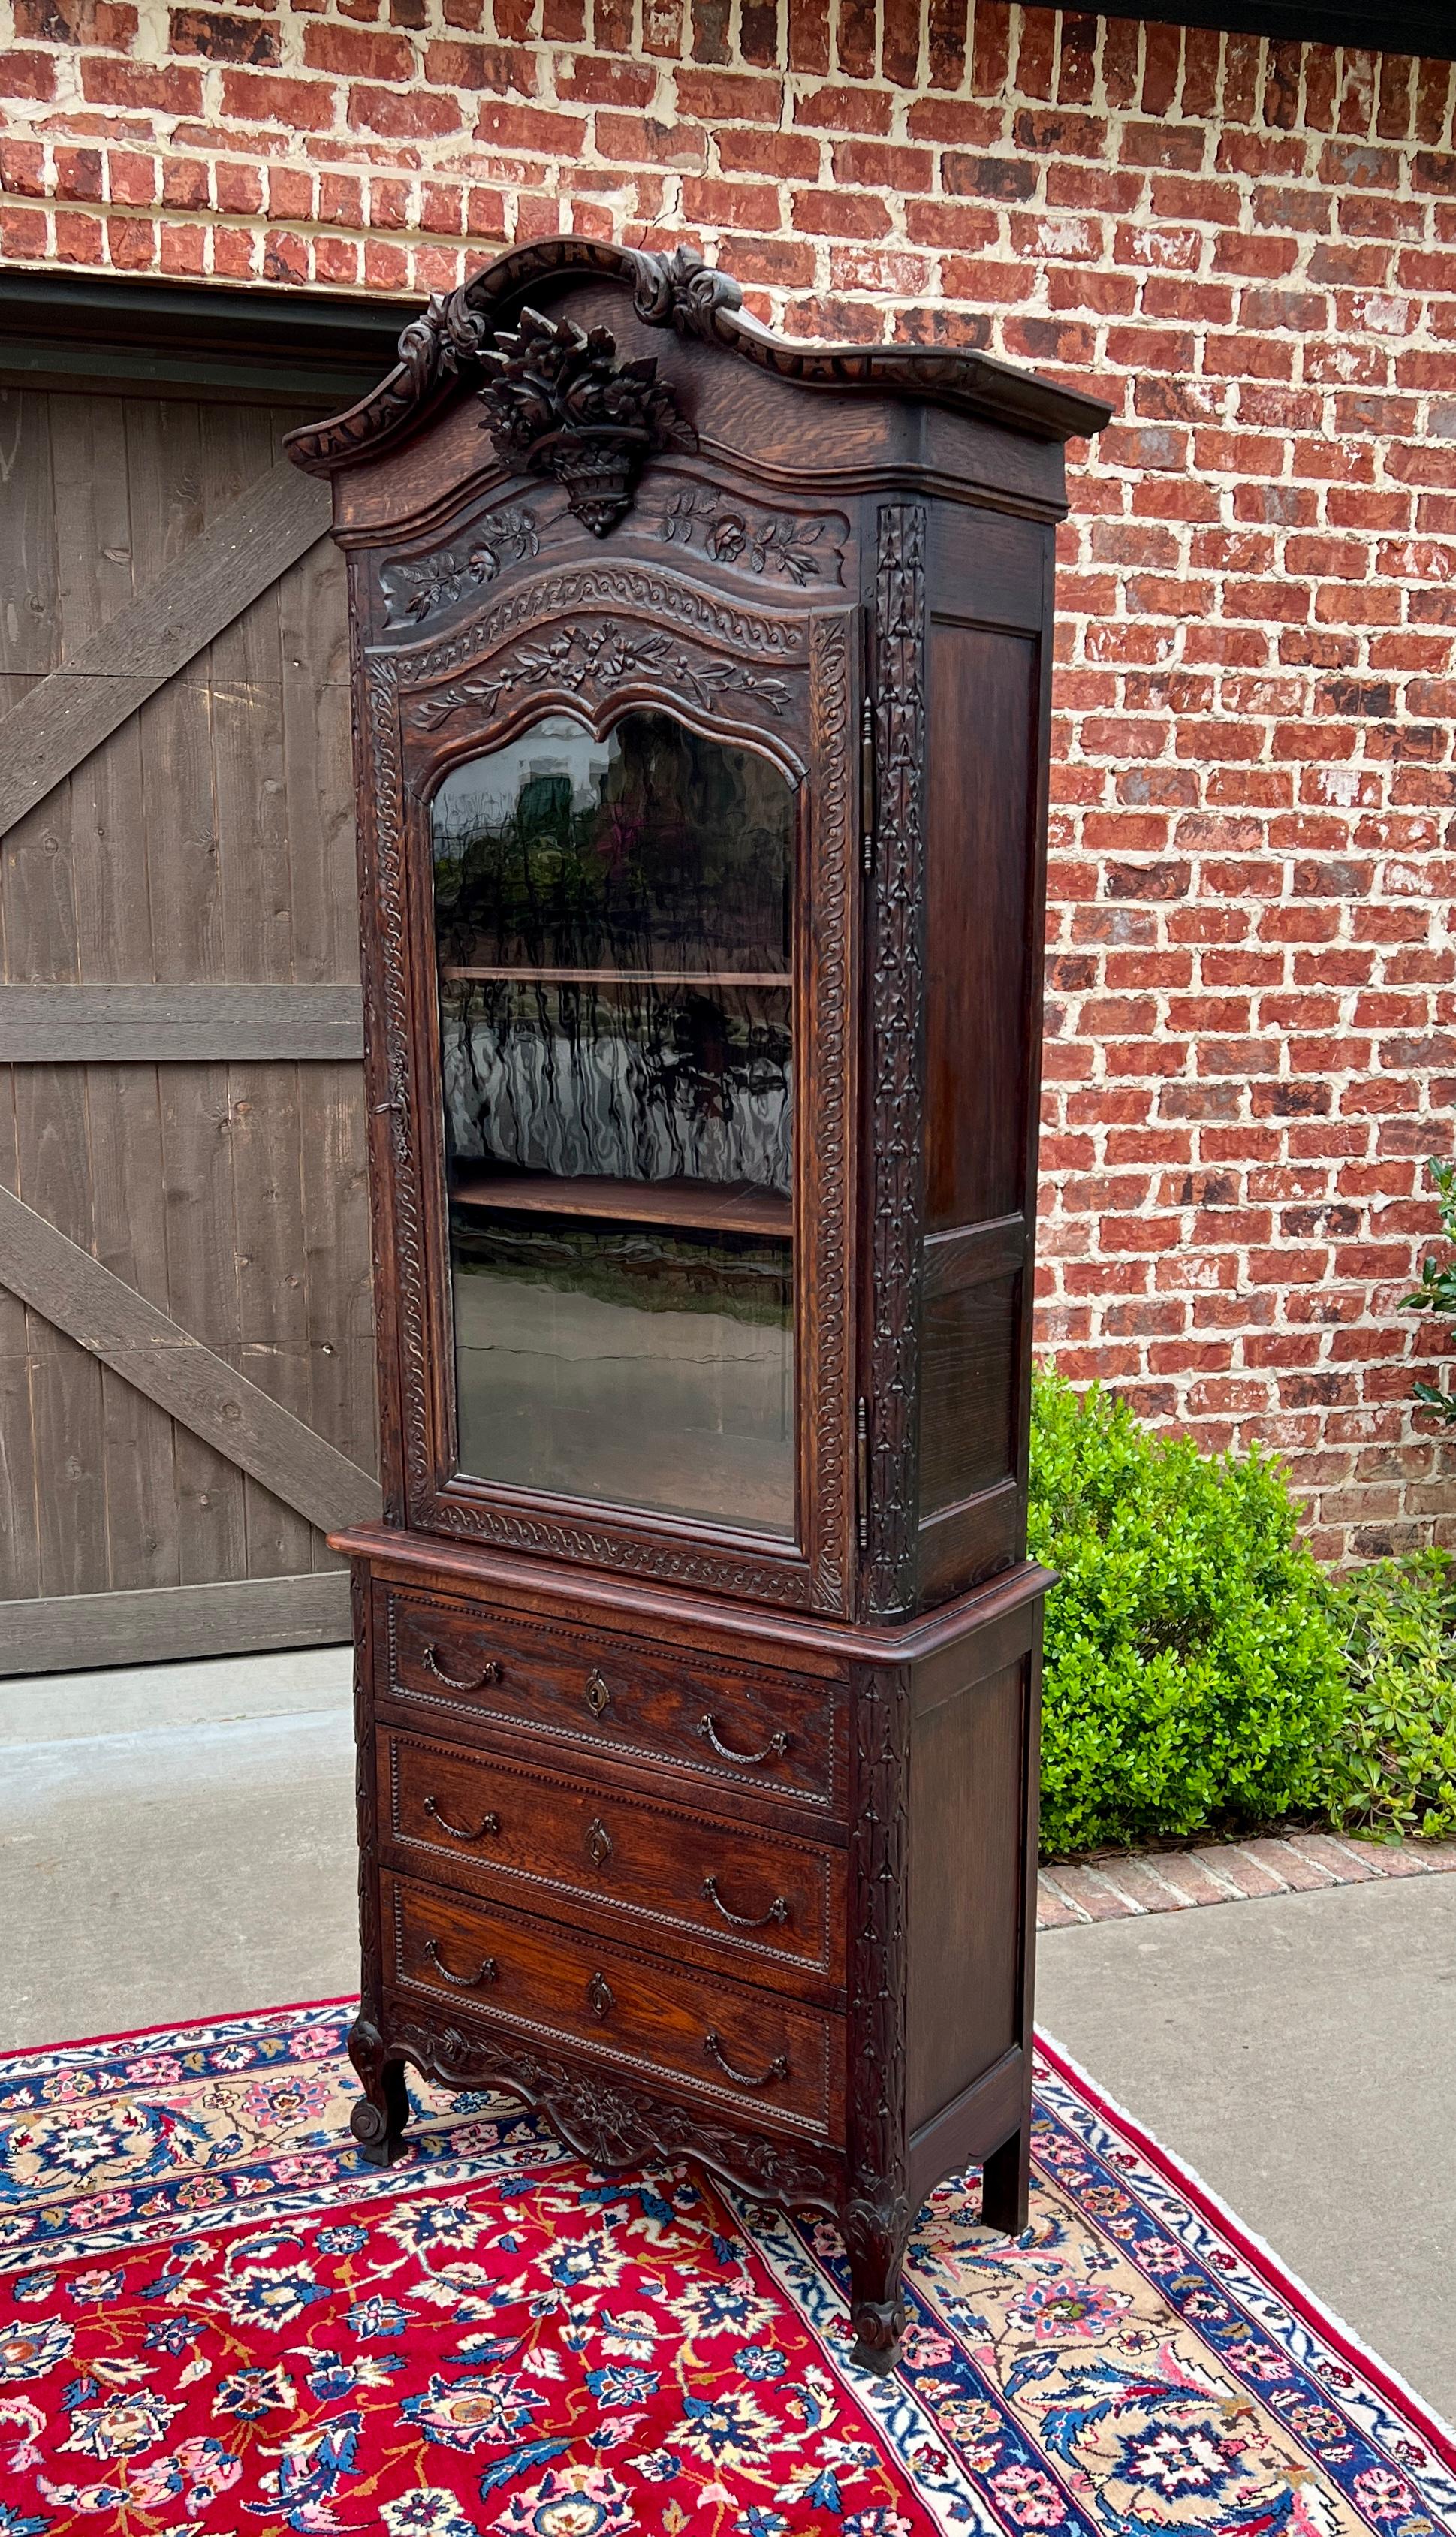 GORGEOUS Antique French Country Carved Oak Bonnet Top Bookcase, Bonnetiere or Vitrine Over 3 Drawer Chest ~~HIGHLY CARVED~~c. 1870s

Versatile size~~SLIM profile fits in smaller spaces~~84